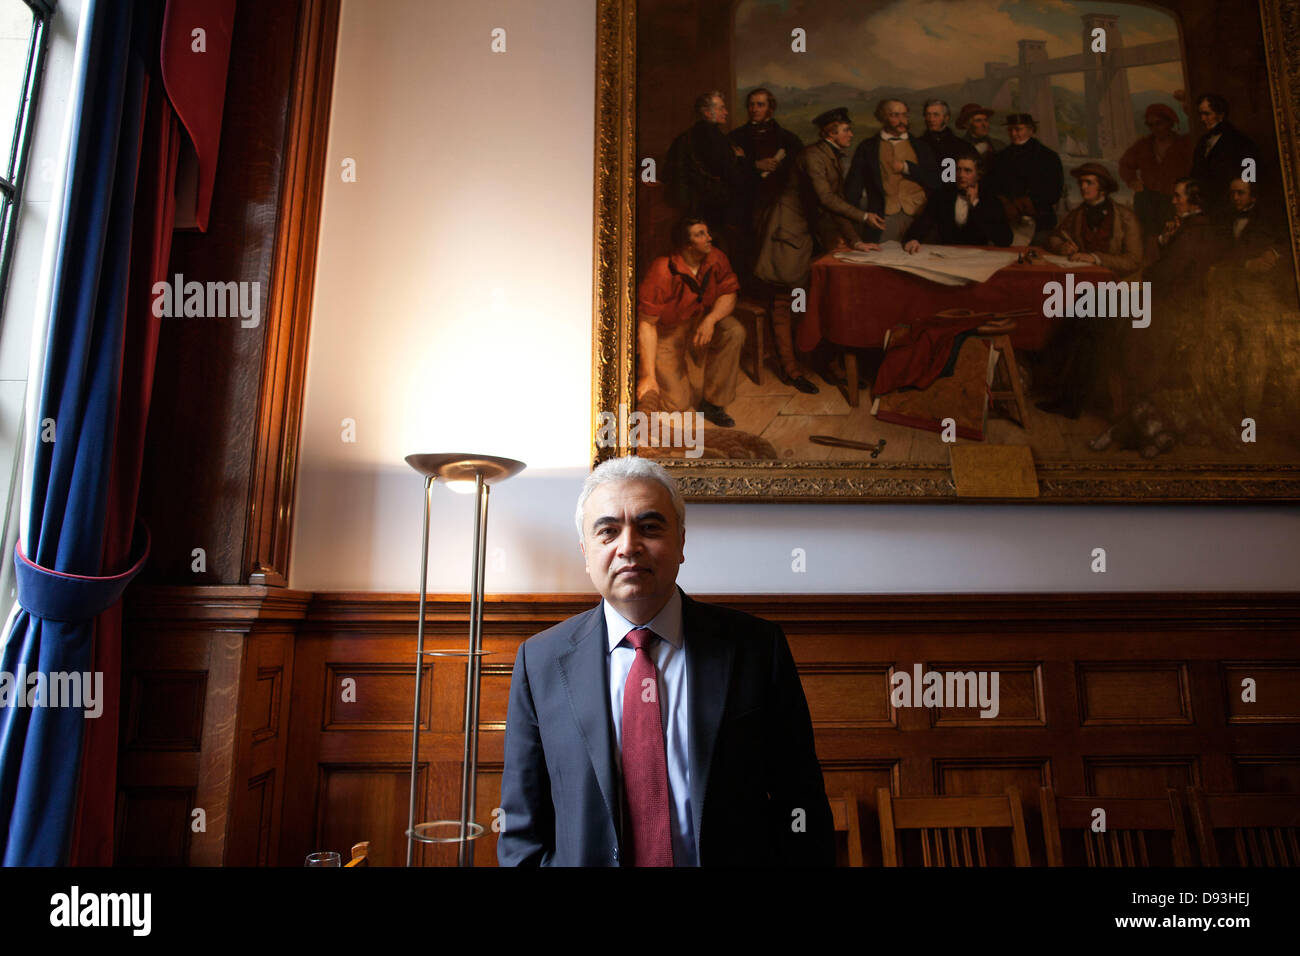 London, UK. 10th June, 2013.  Picture shows Fatih Birol, the Chief Economist and Director of Global Energy Economics at the International Energy Agency conference today in London, UK. Stock Photo